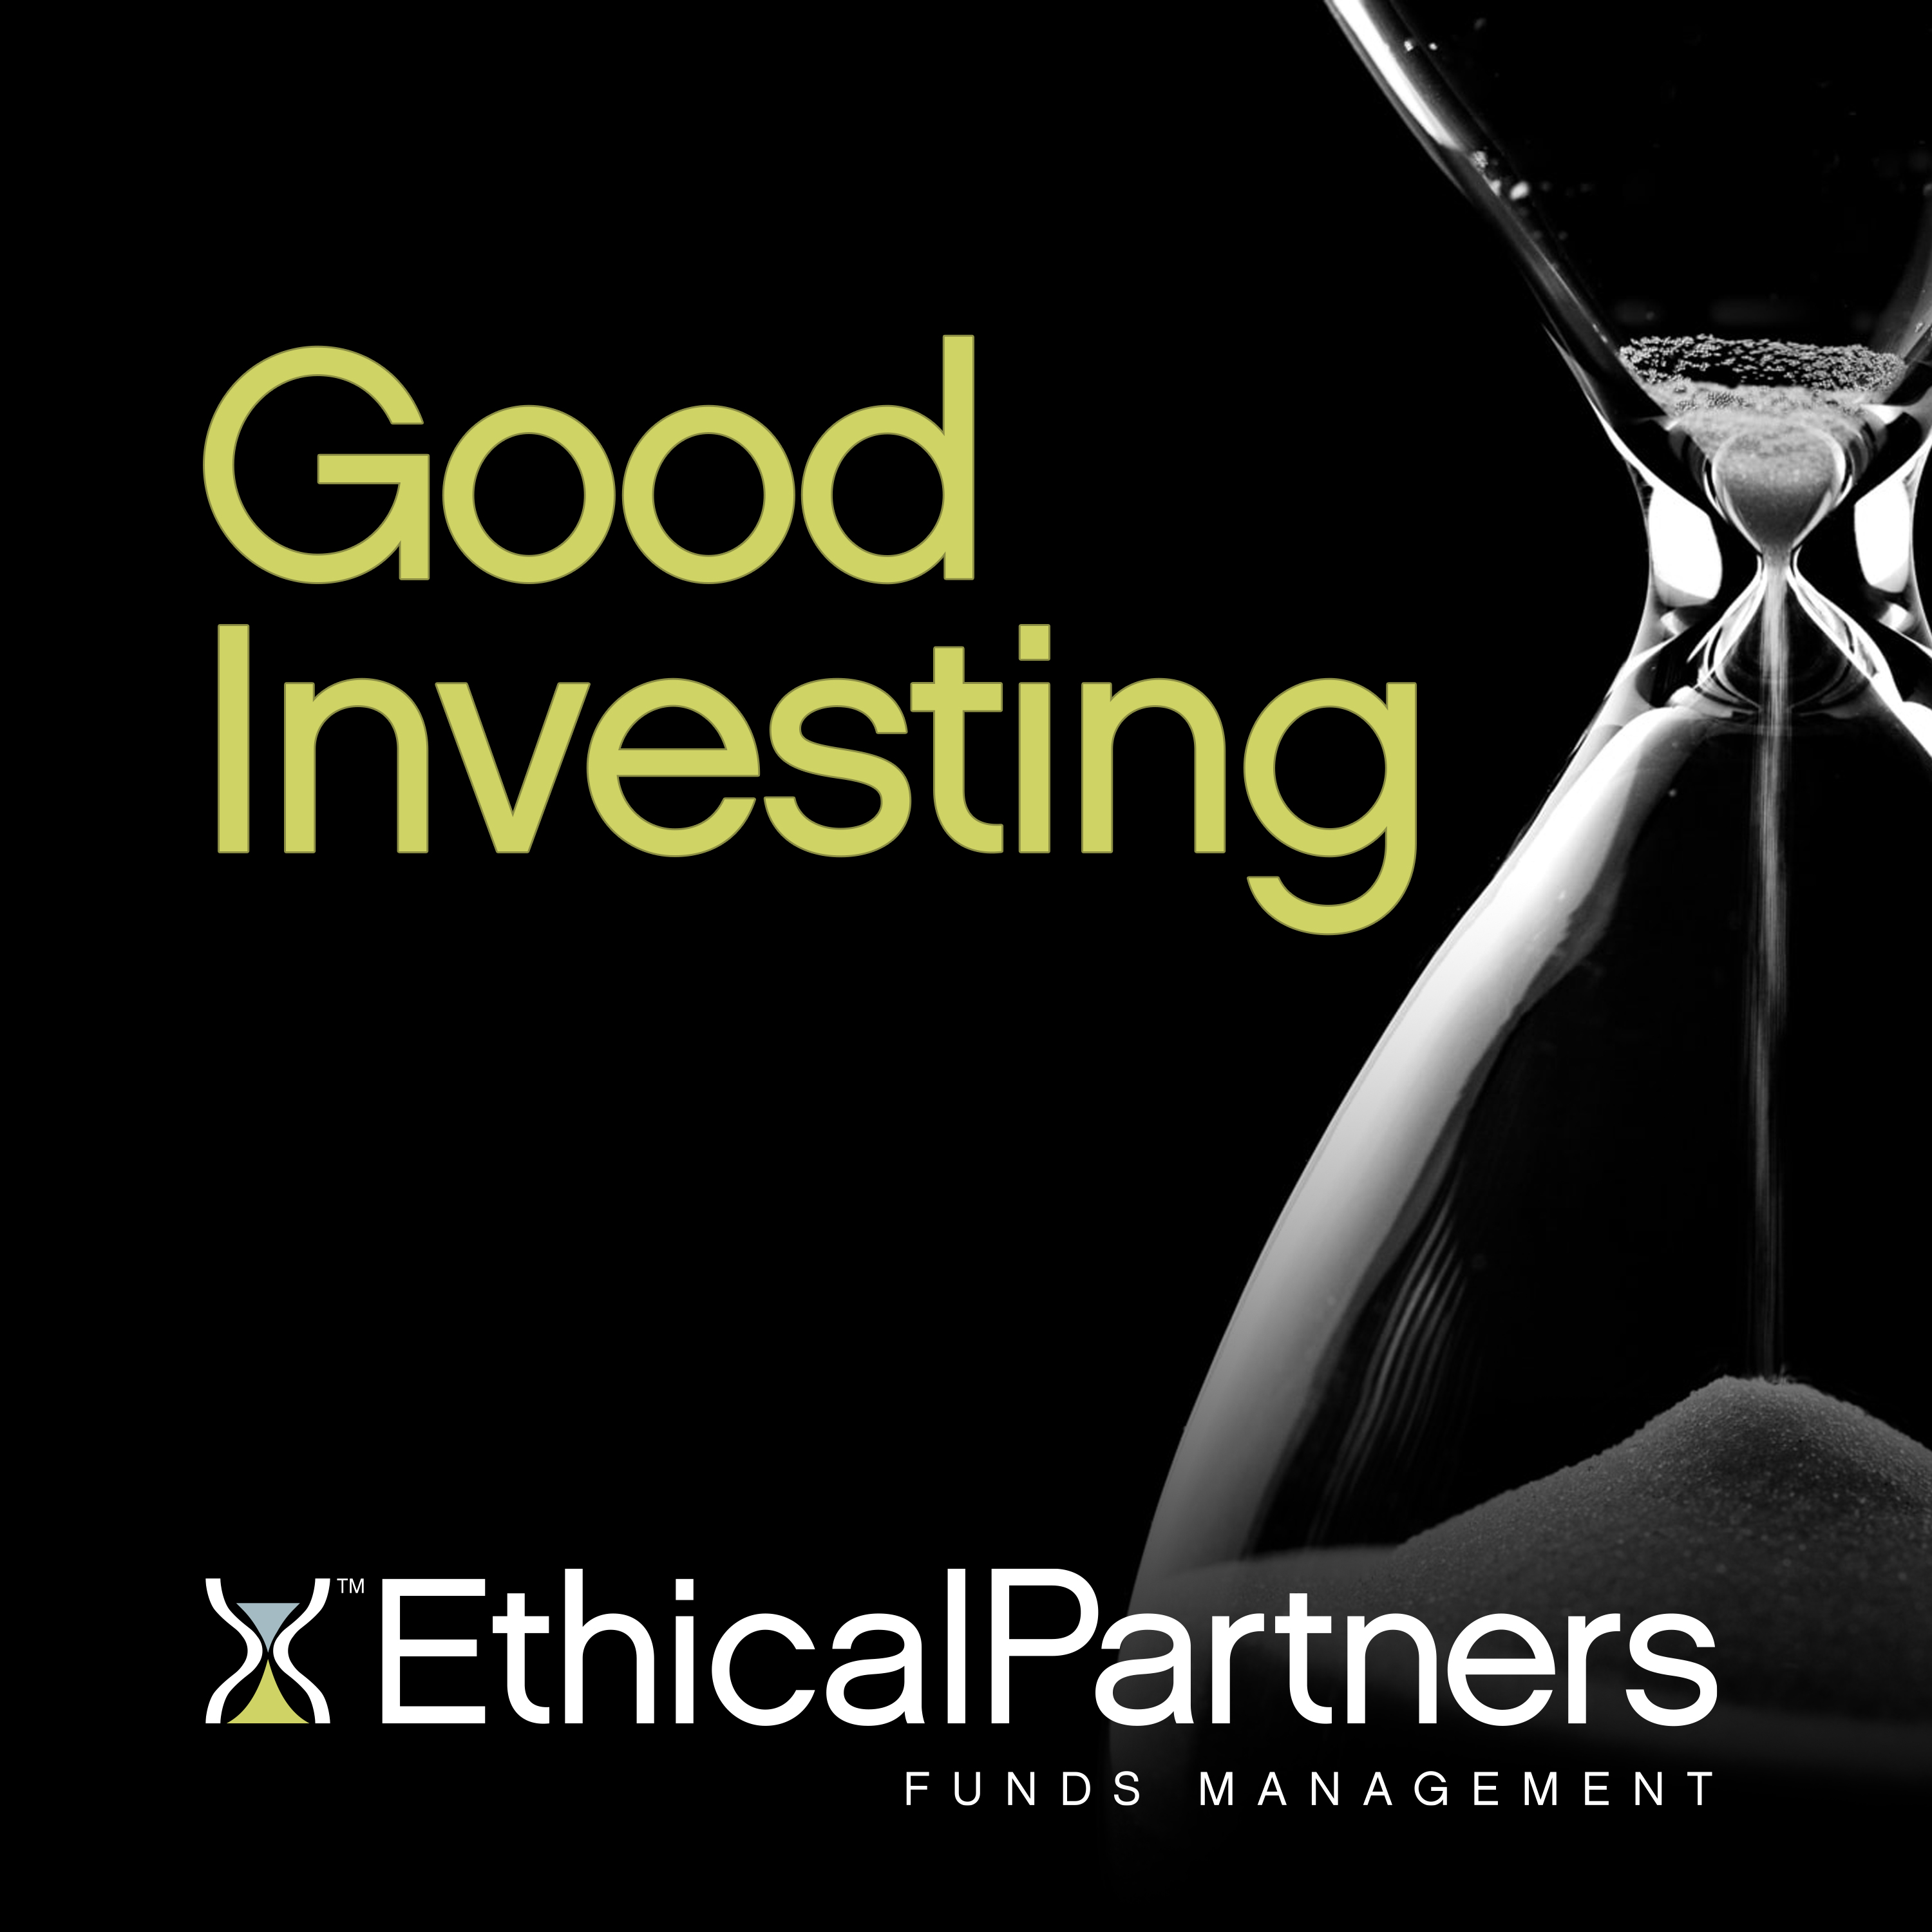 Ethical Partners – Good Investing